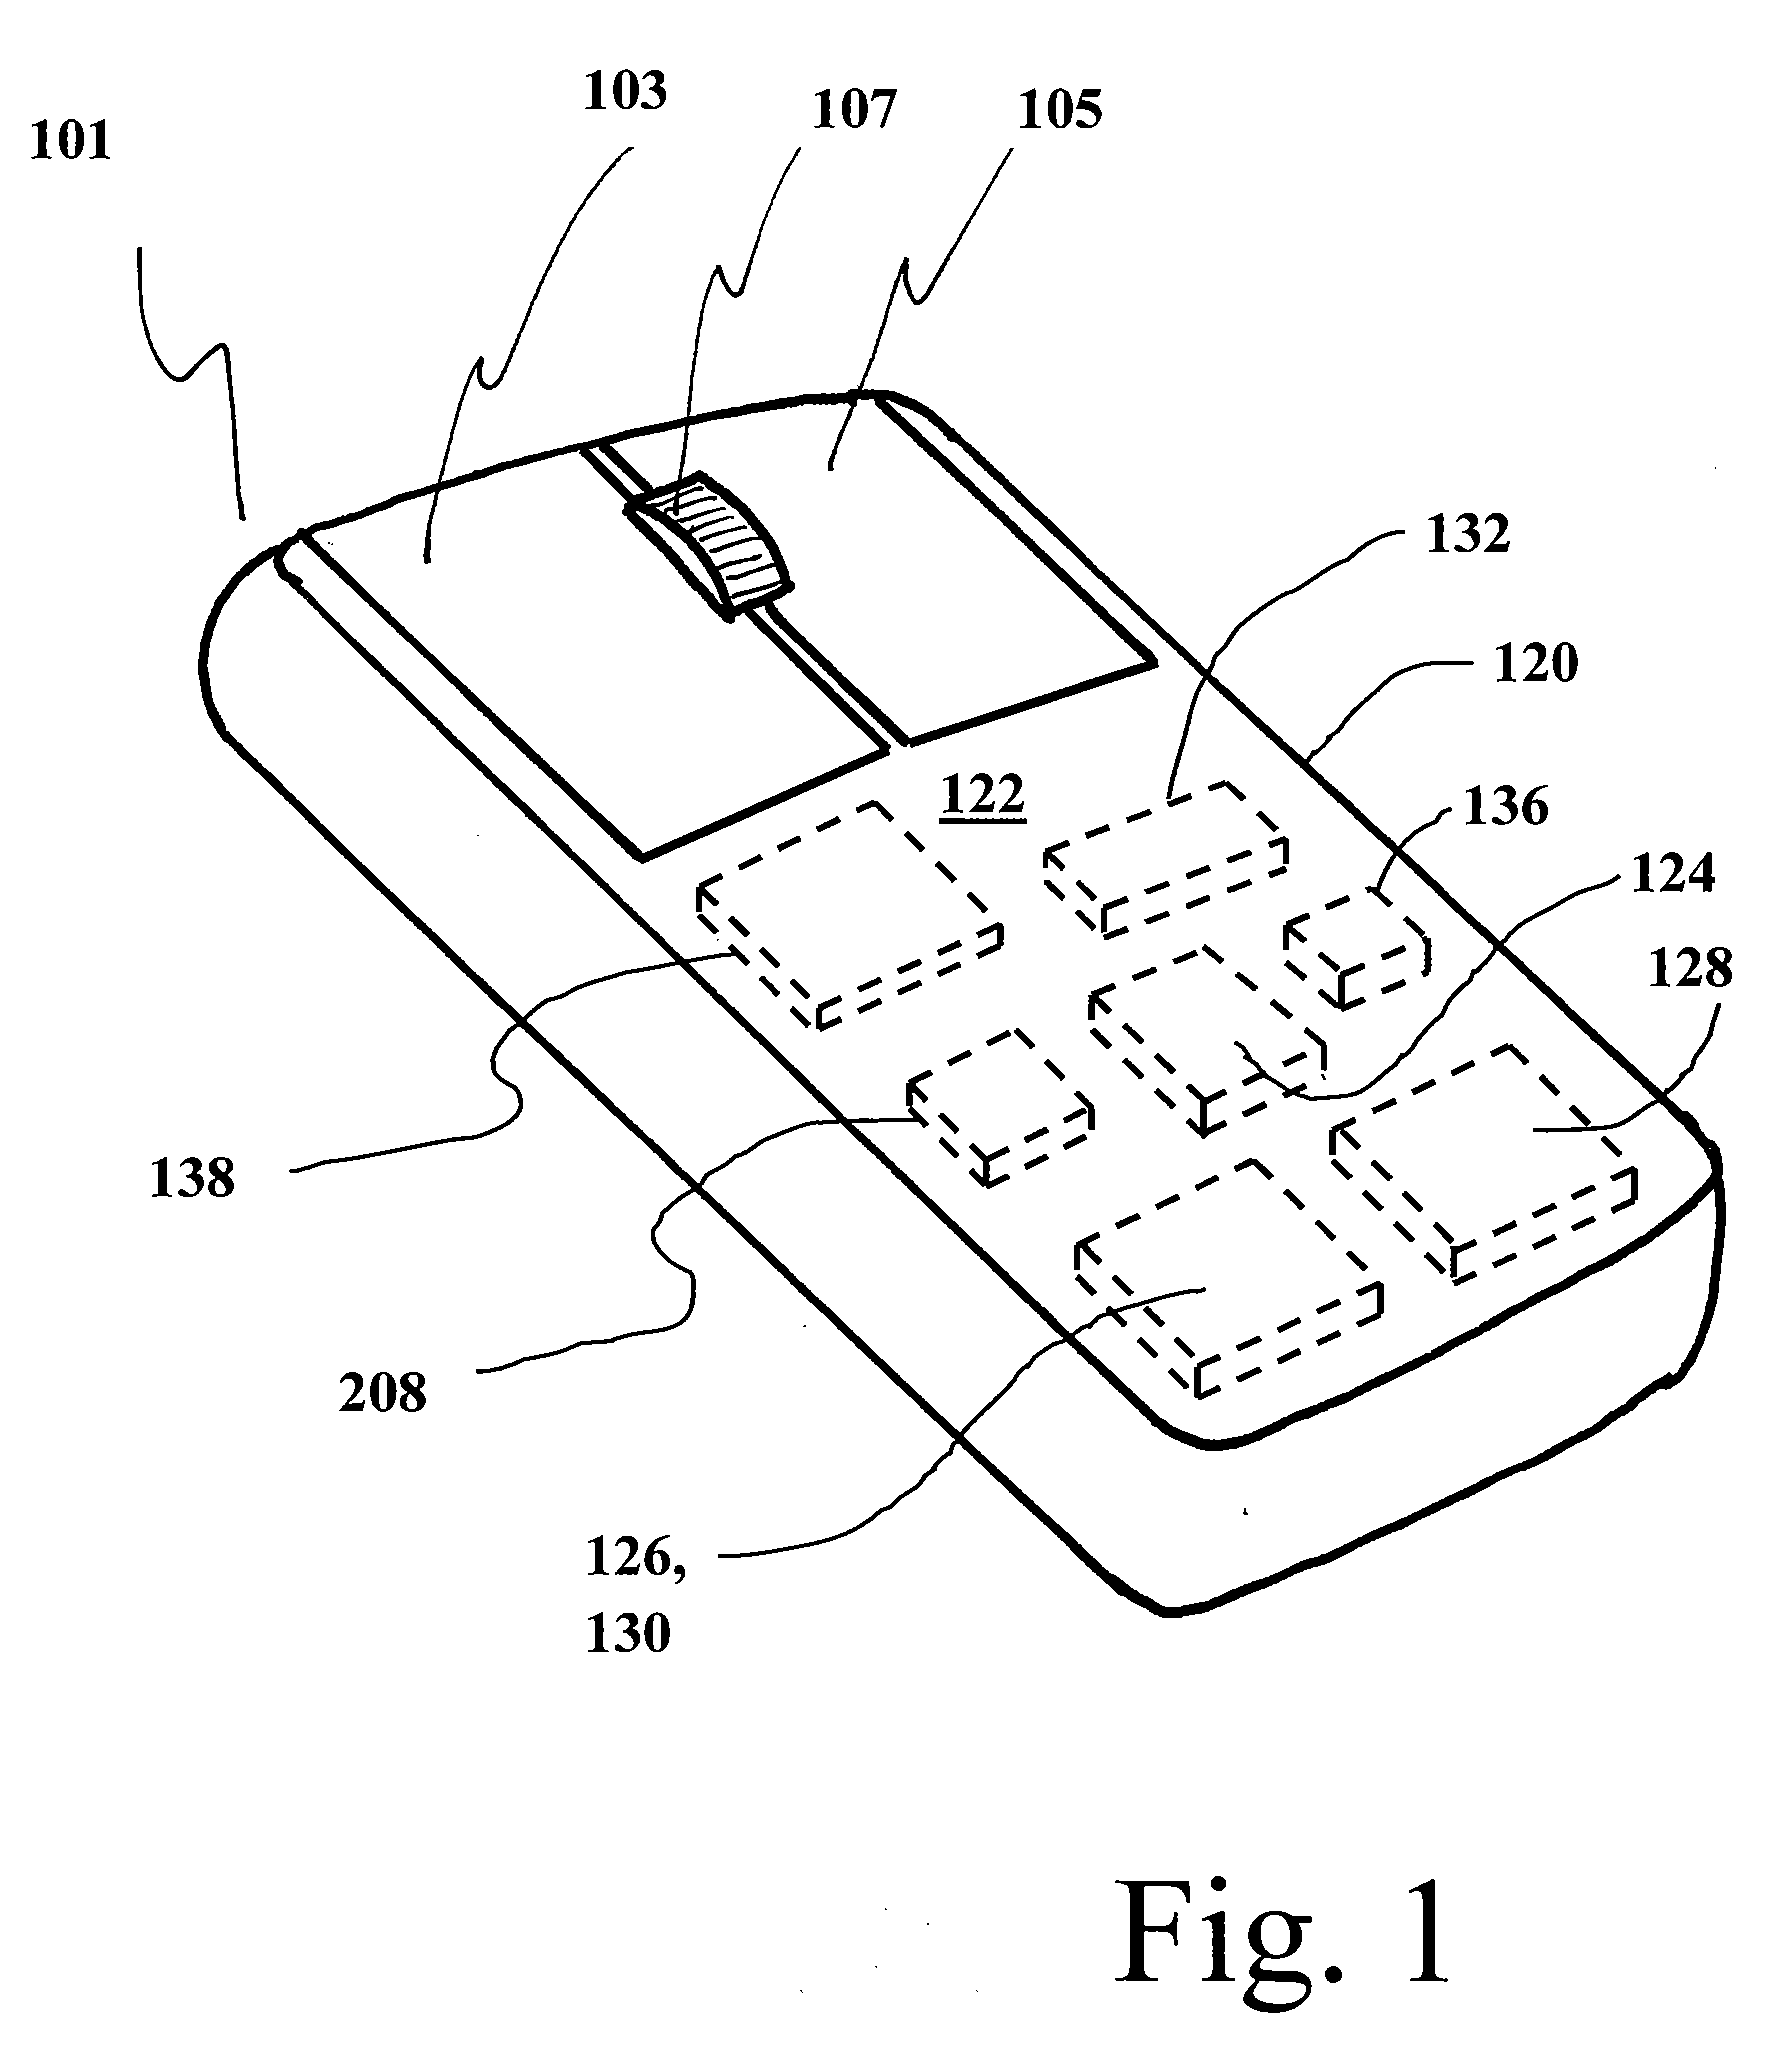 Combination thumb keyboard and mouse